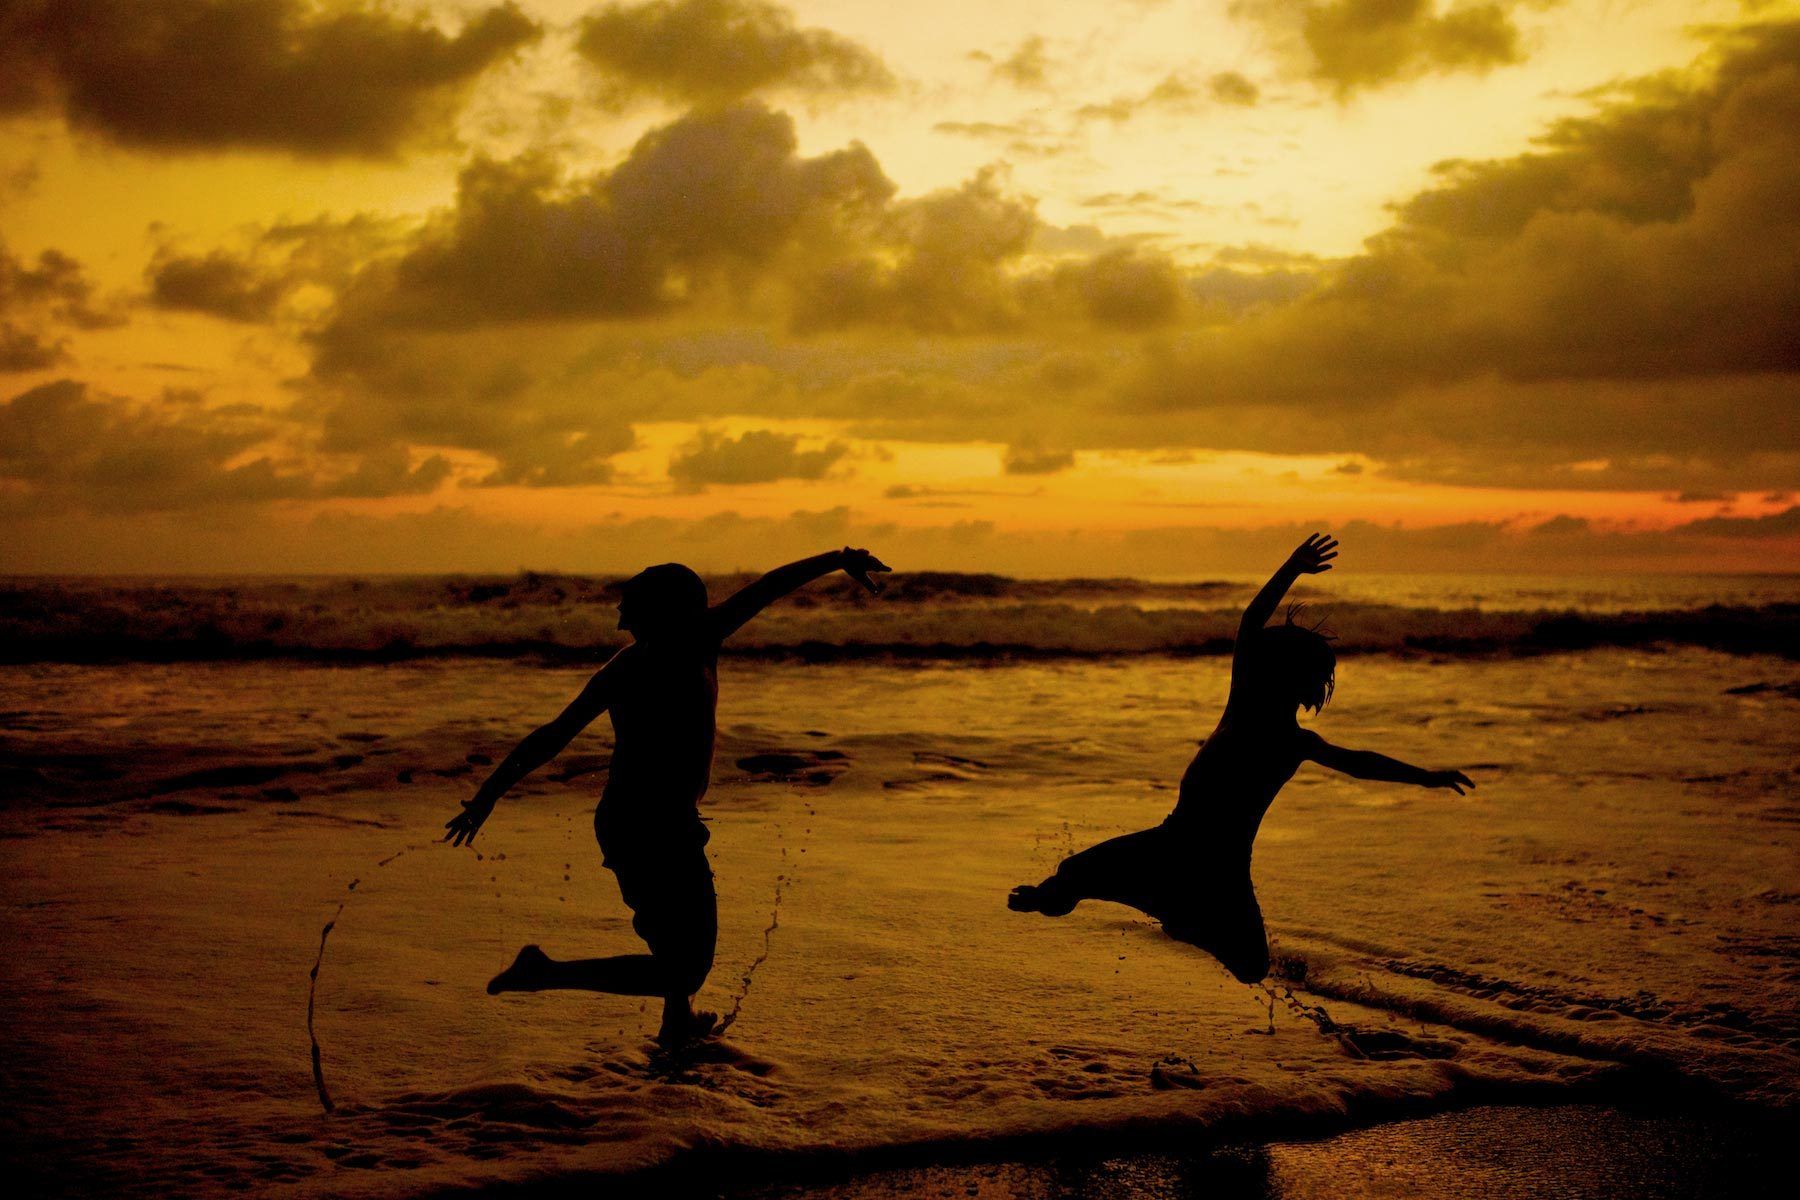 Lou-Bopp-Lifestyle-photography-boys-jumping-on-beach-at-sunset